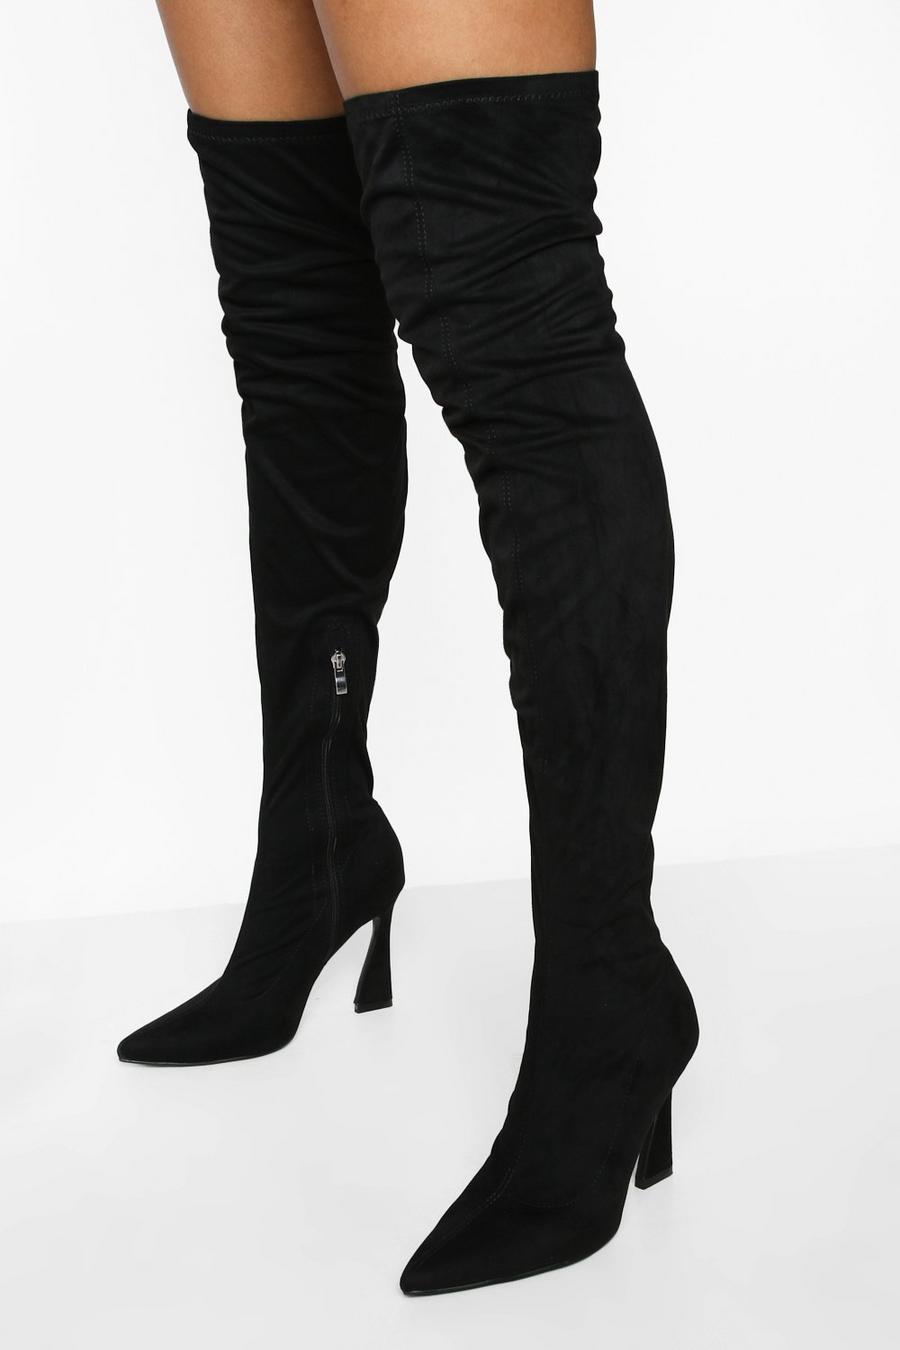 Black Wide Width Pointed Toe Over The Knee Boot